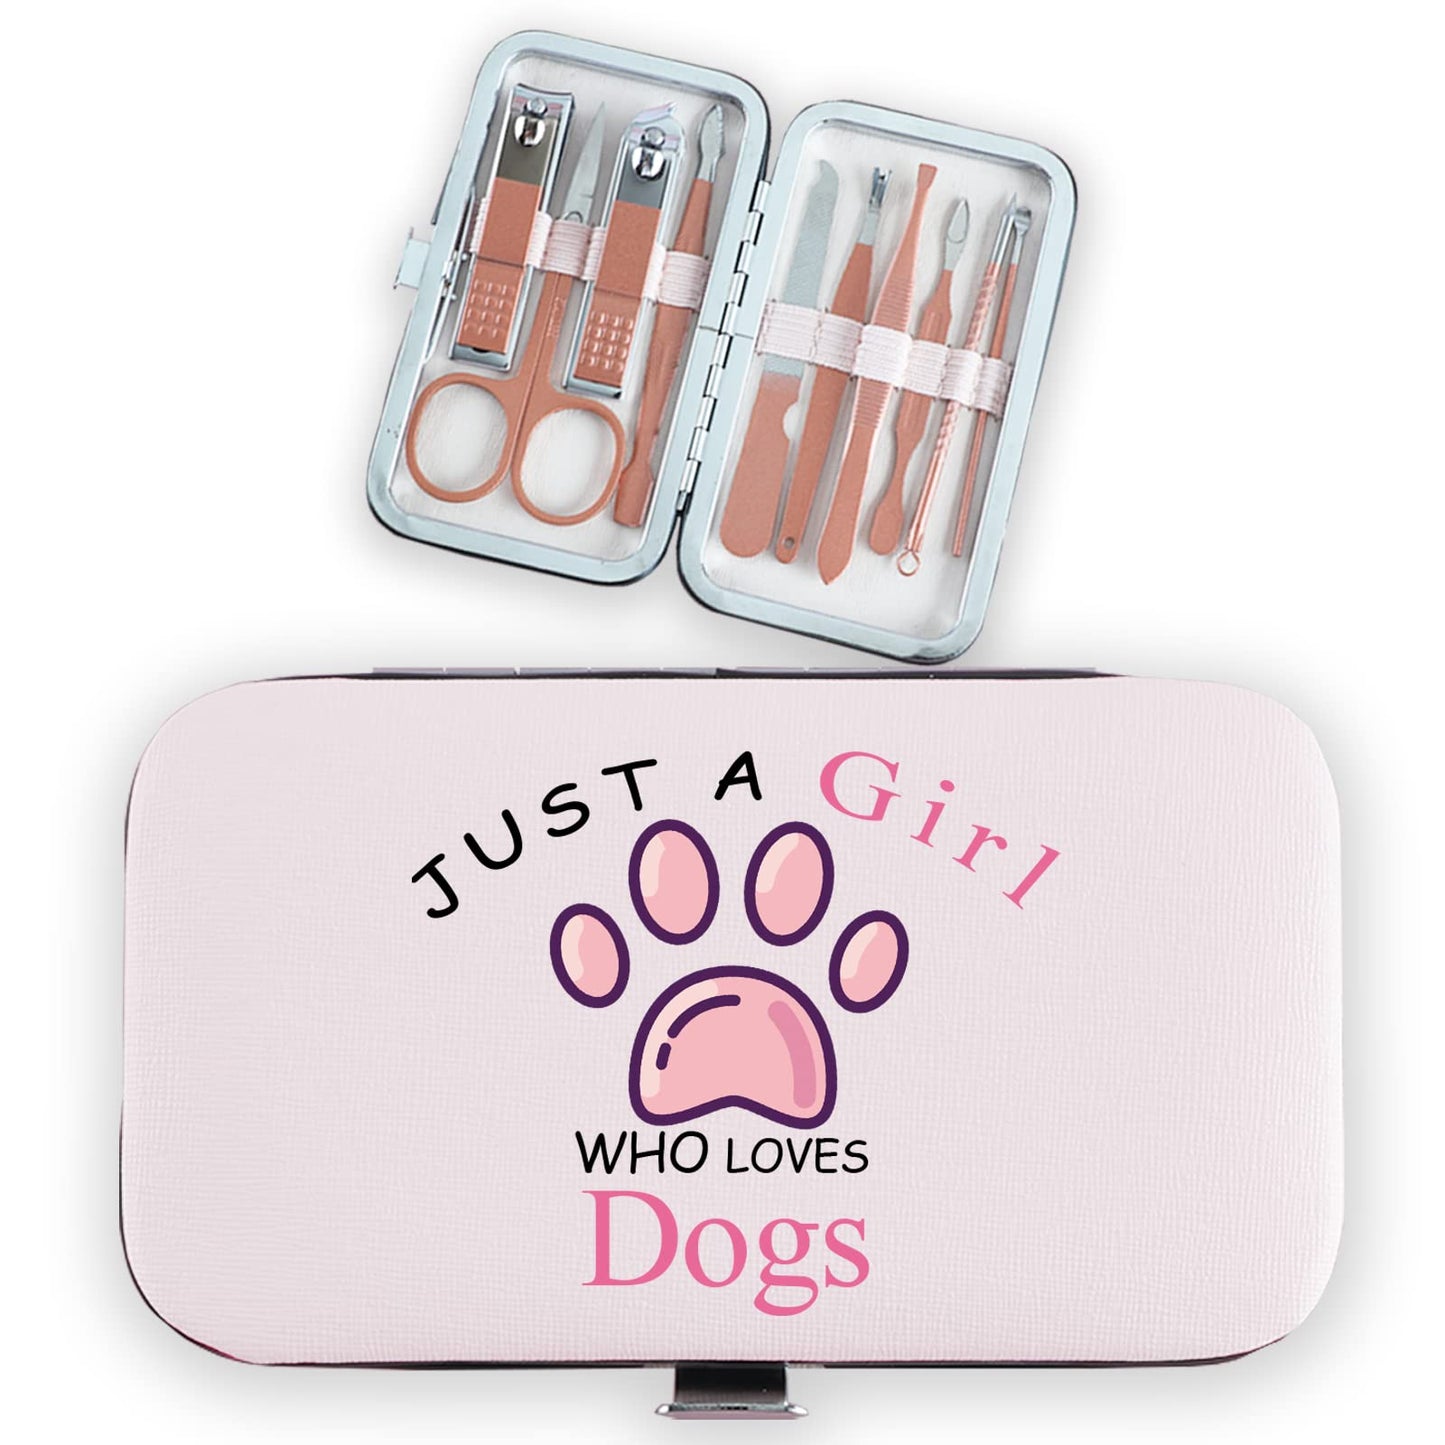 Gifts for Dog Lovers Girls 10pcs Tools Women Travel Manicure Pedicure Grooming Set Rose Gold Just A Girl Who Loves Dogs Birthday Christmas Thanksgiving Gifts for Sister Daughter Granddaughter Friends